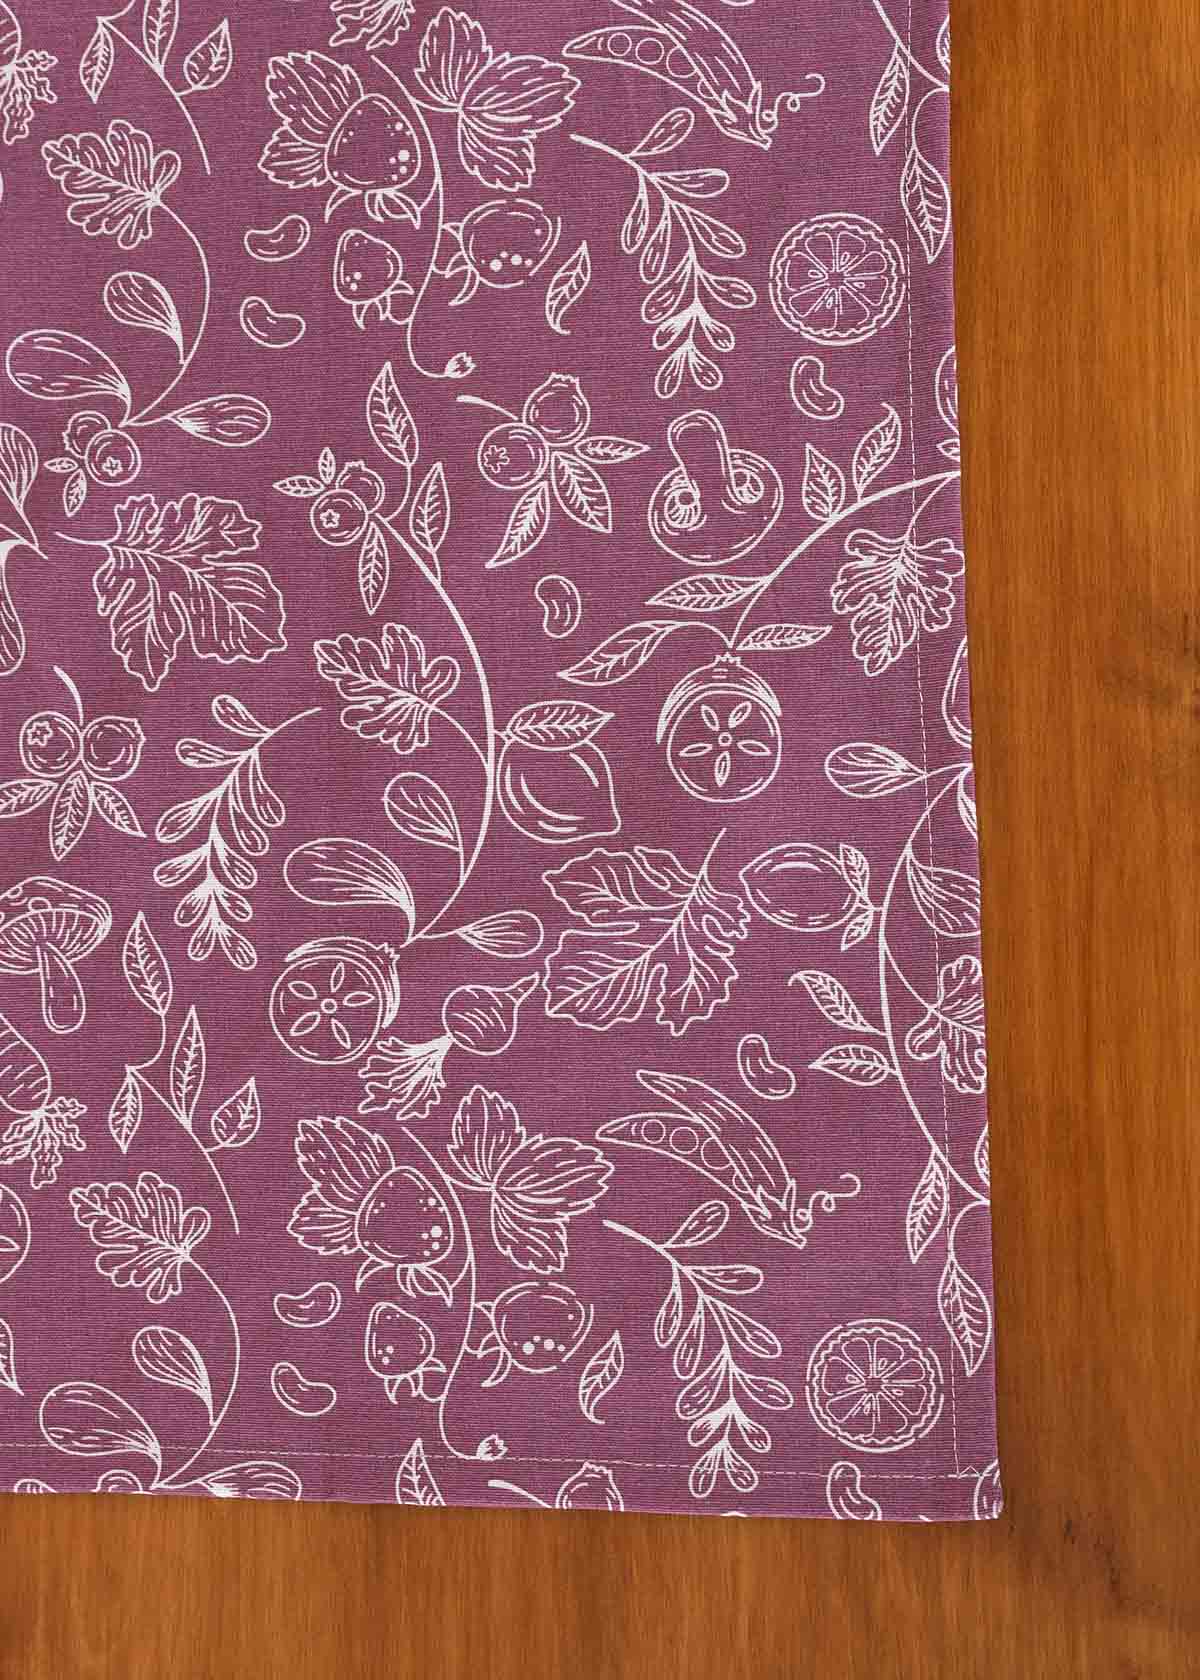 Kitchen garden 100% cotton customisable floral table cloth for dining - Violet